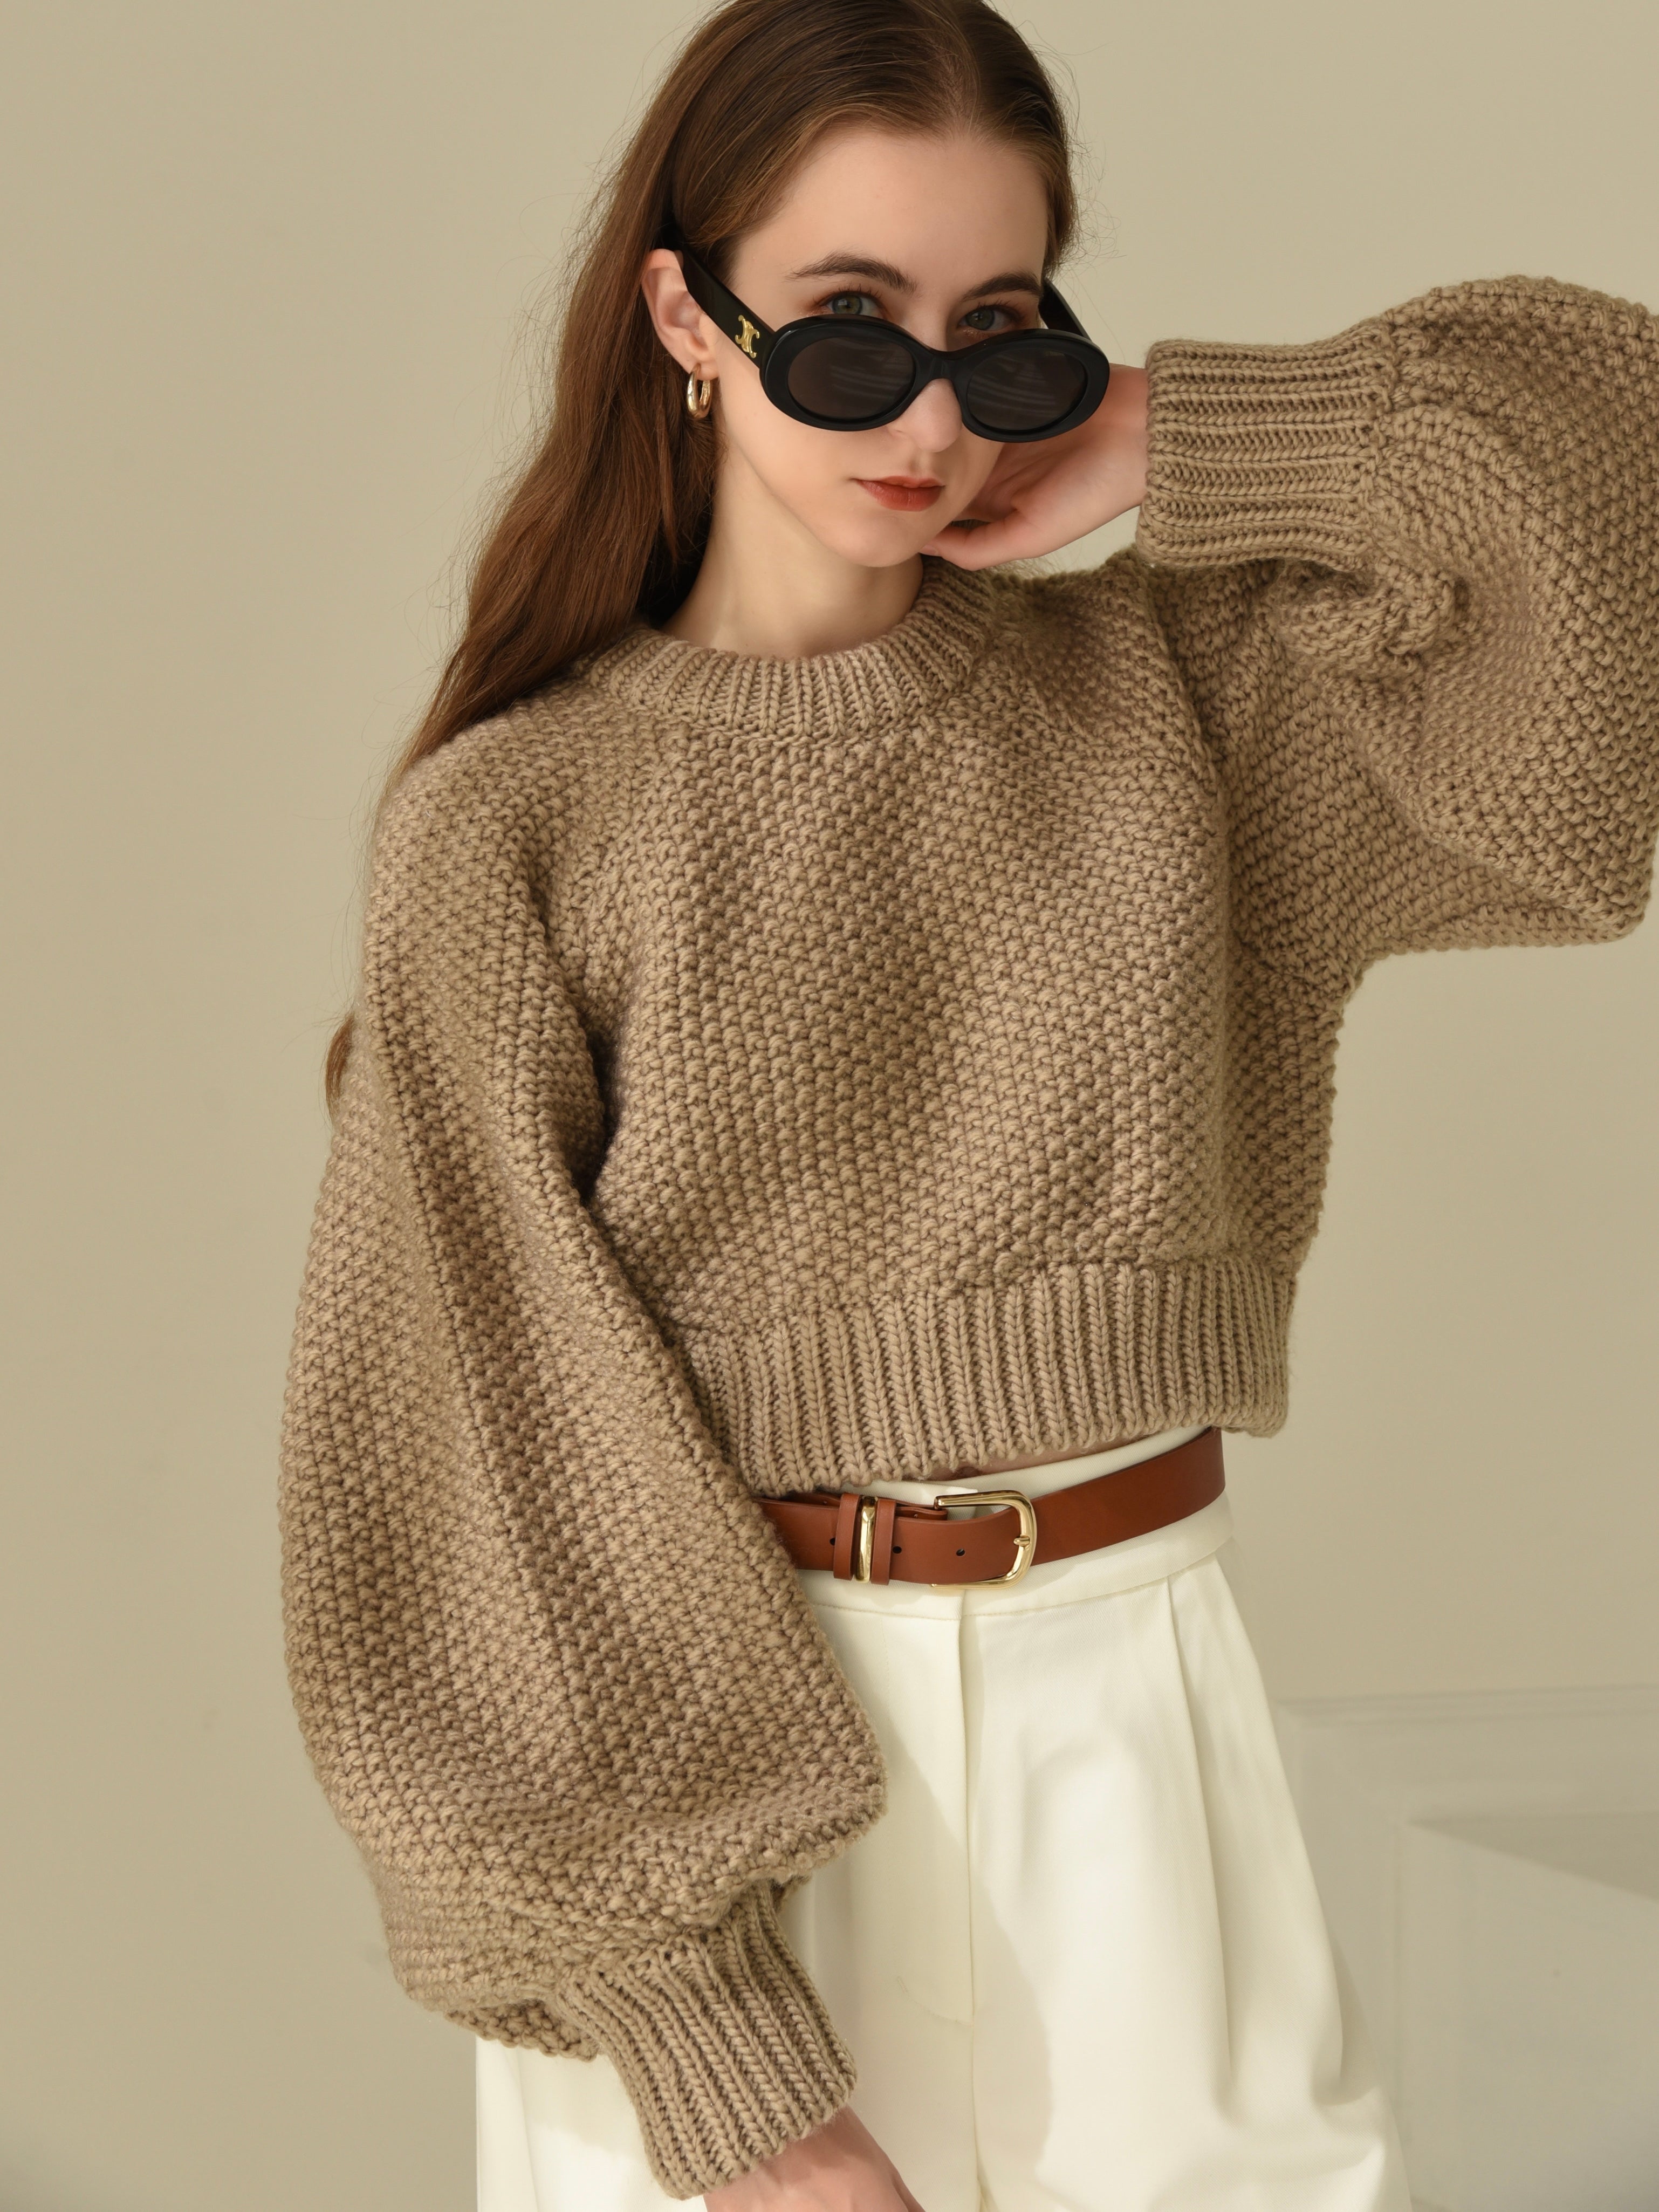 L'Appartement Volume Sleeve Knit